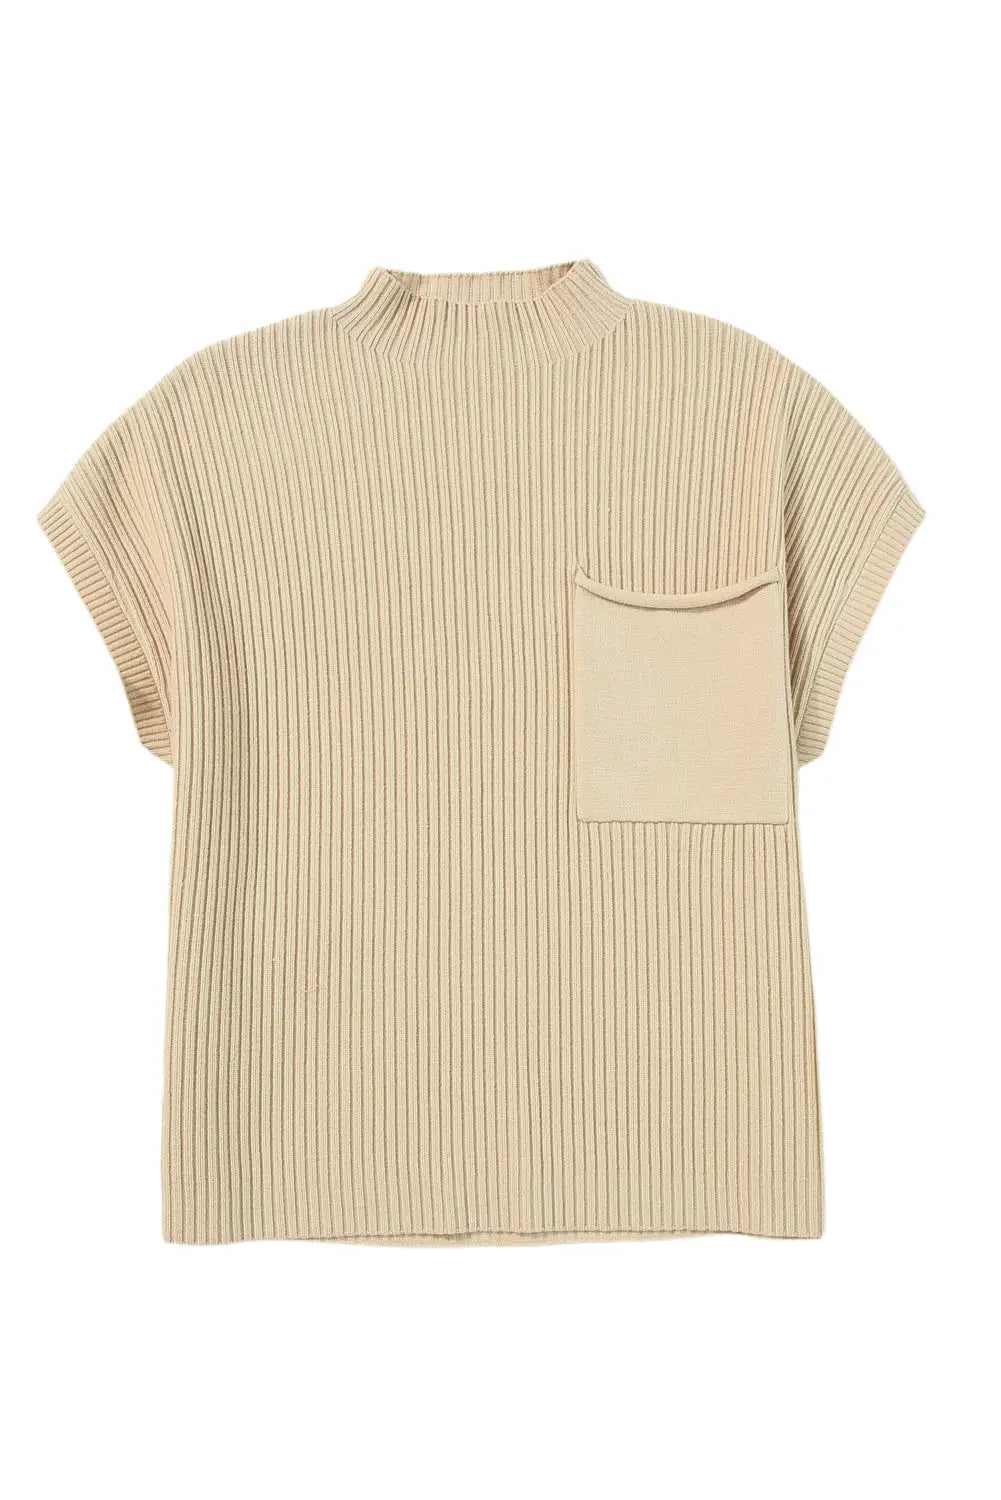 Oatmeal patch pocket ribbed knit short sleeve sweater - sweaters & cardigans